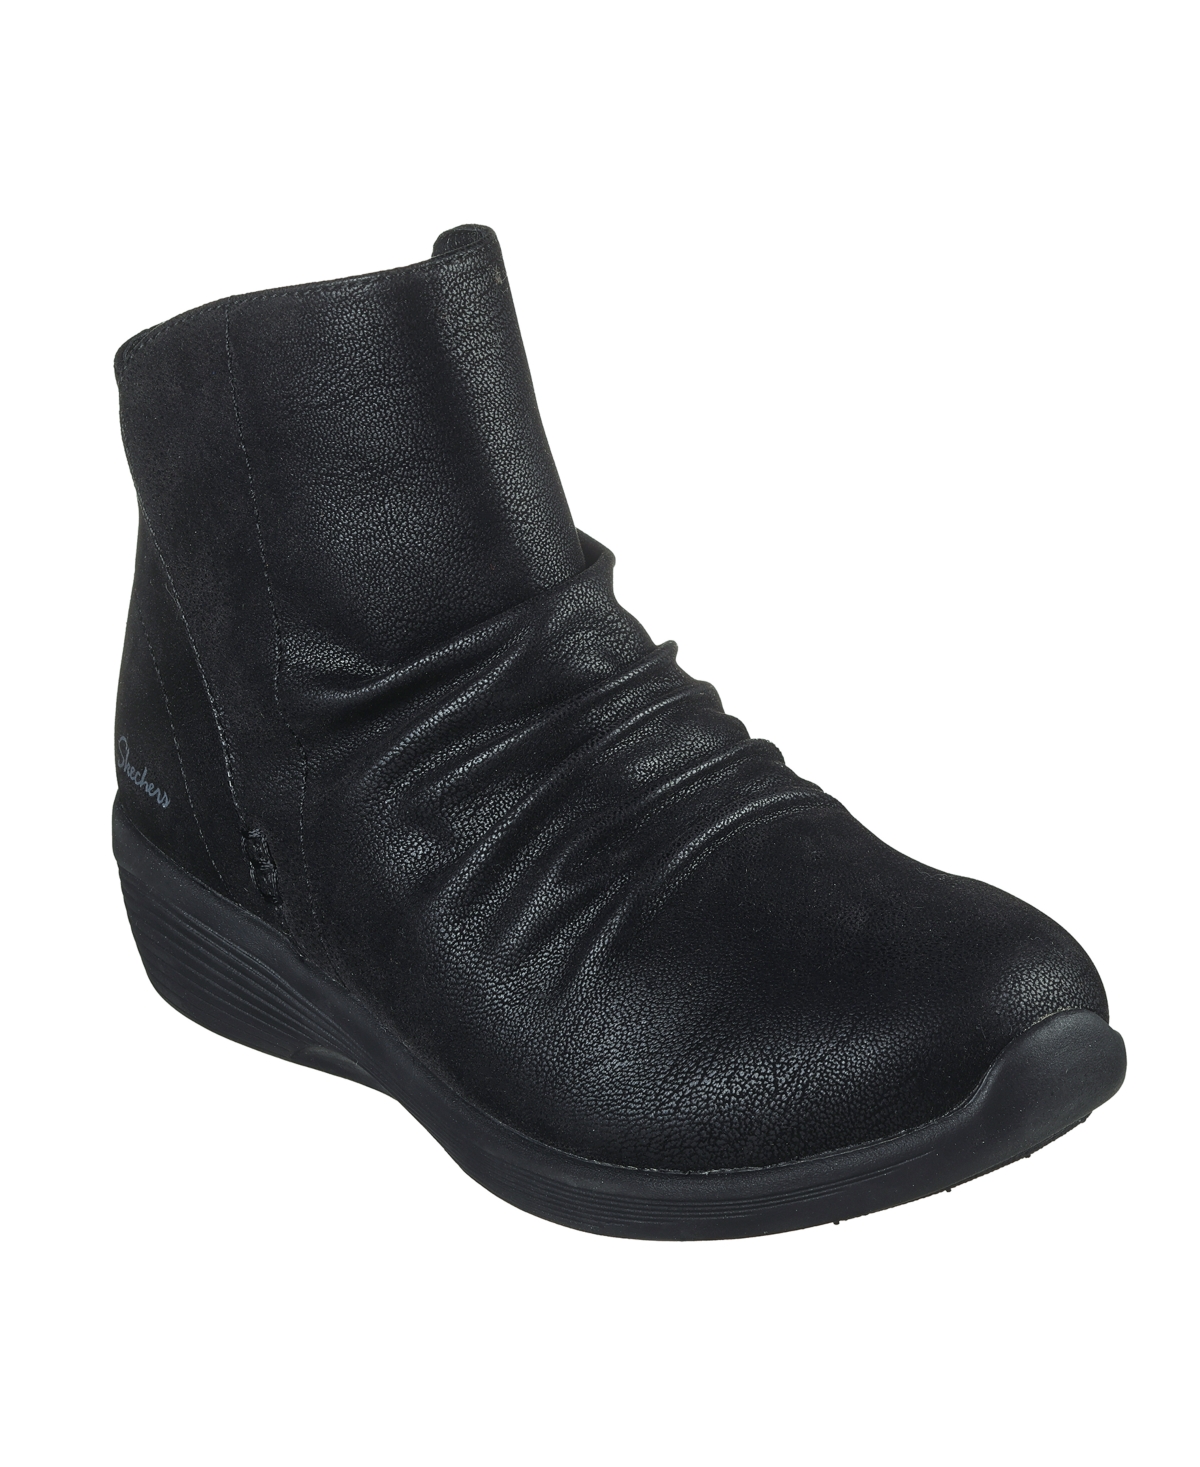 Women's Arya - Fresher Trick Ankle Boots from Finish Line - Black